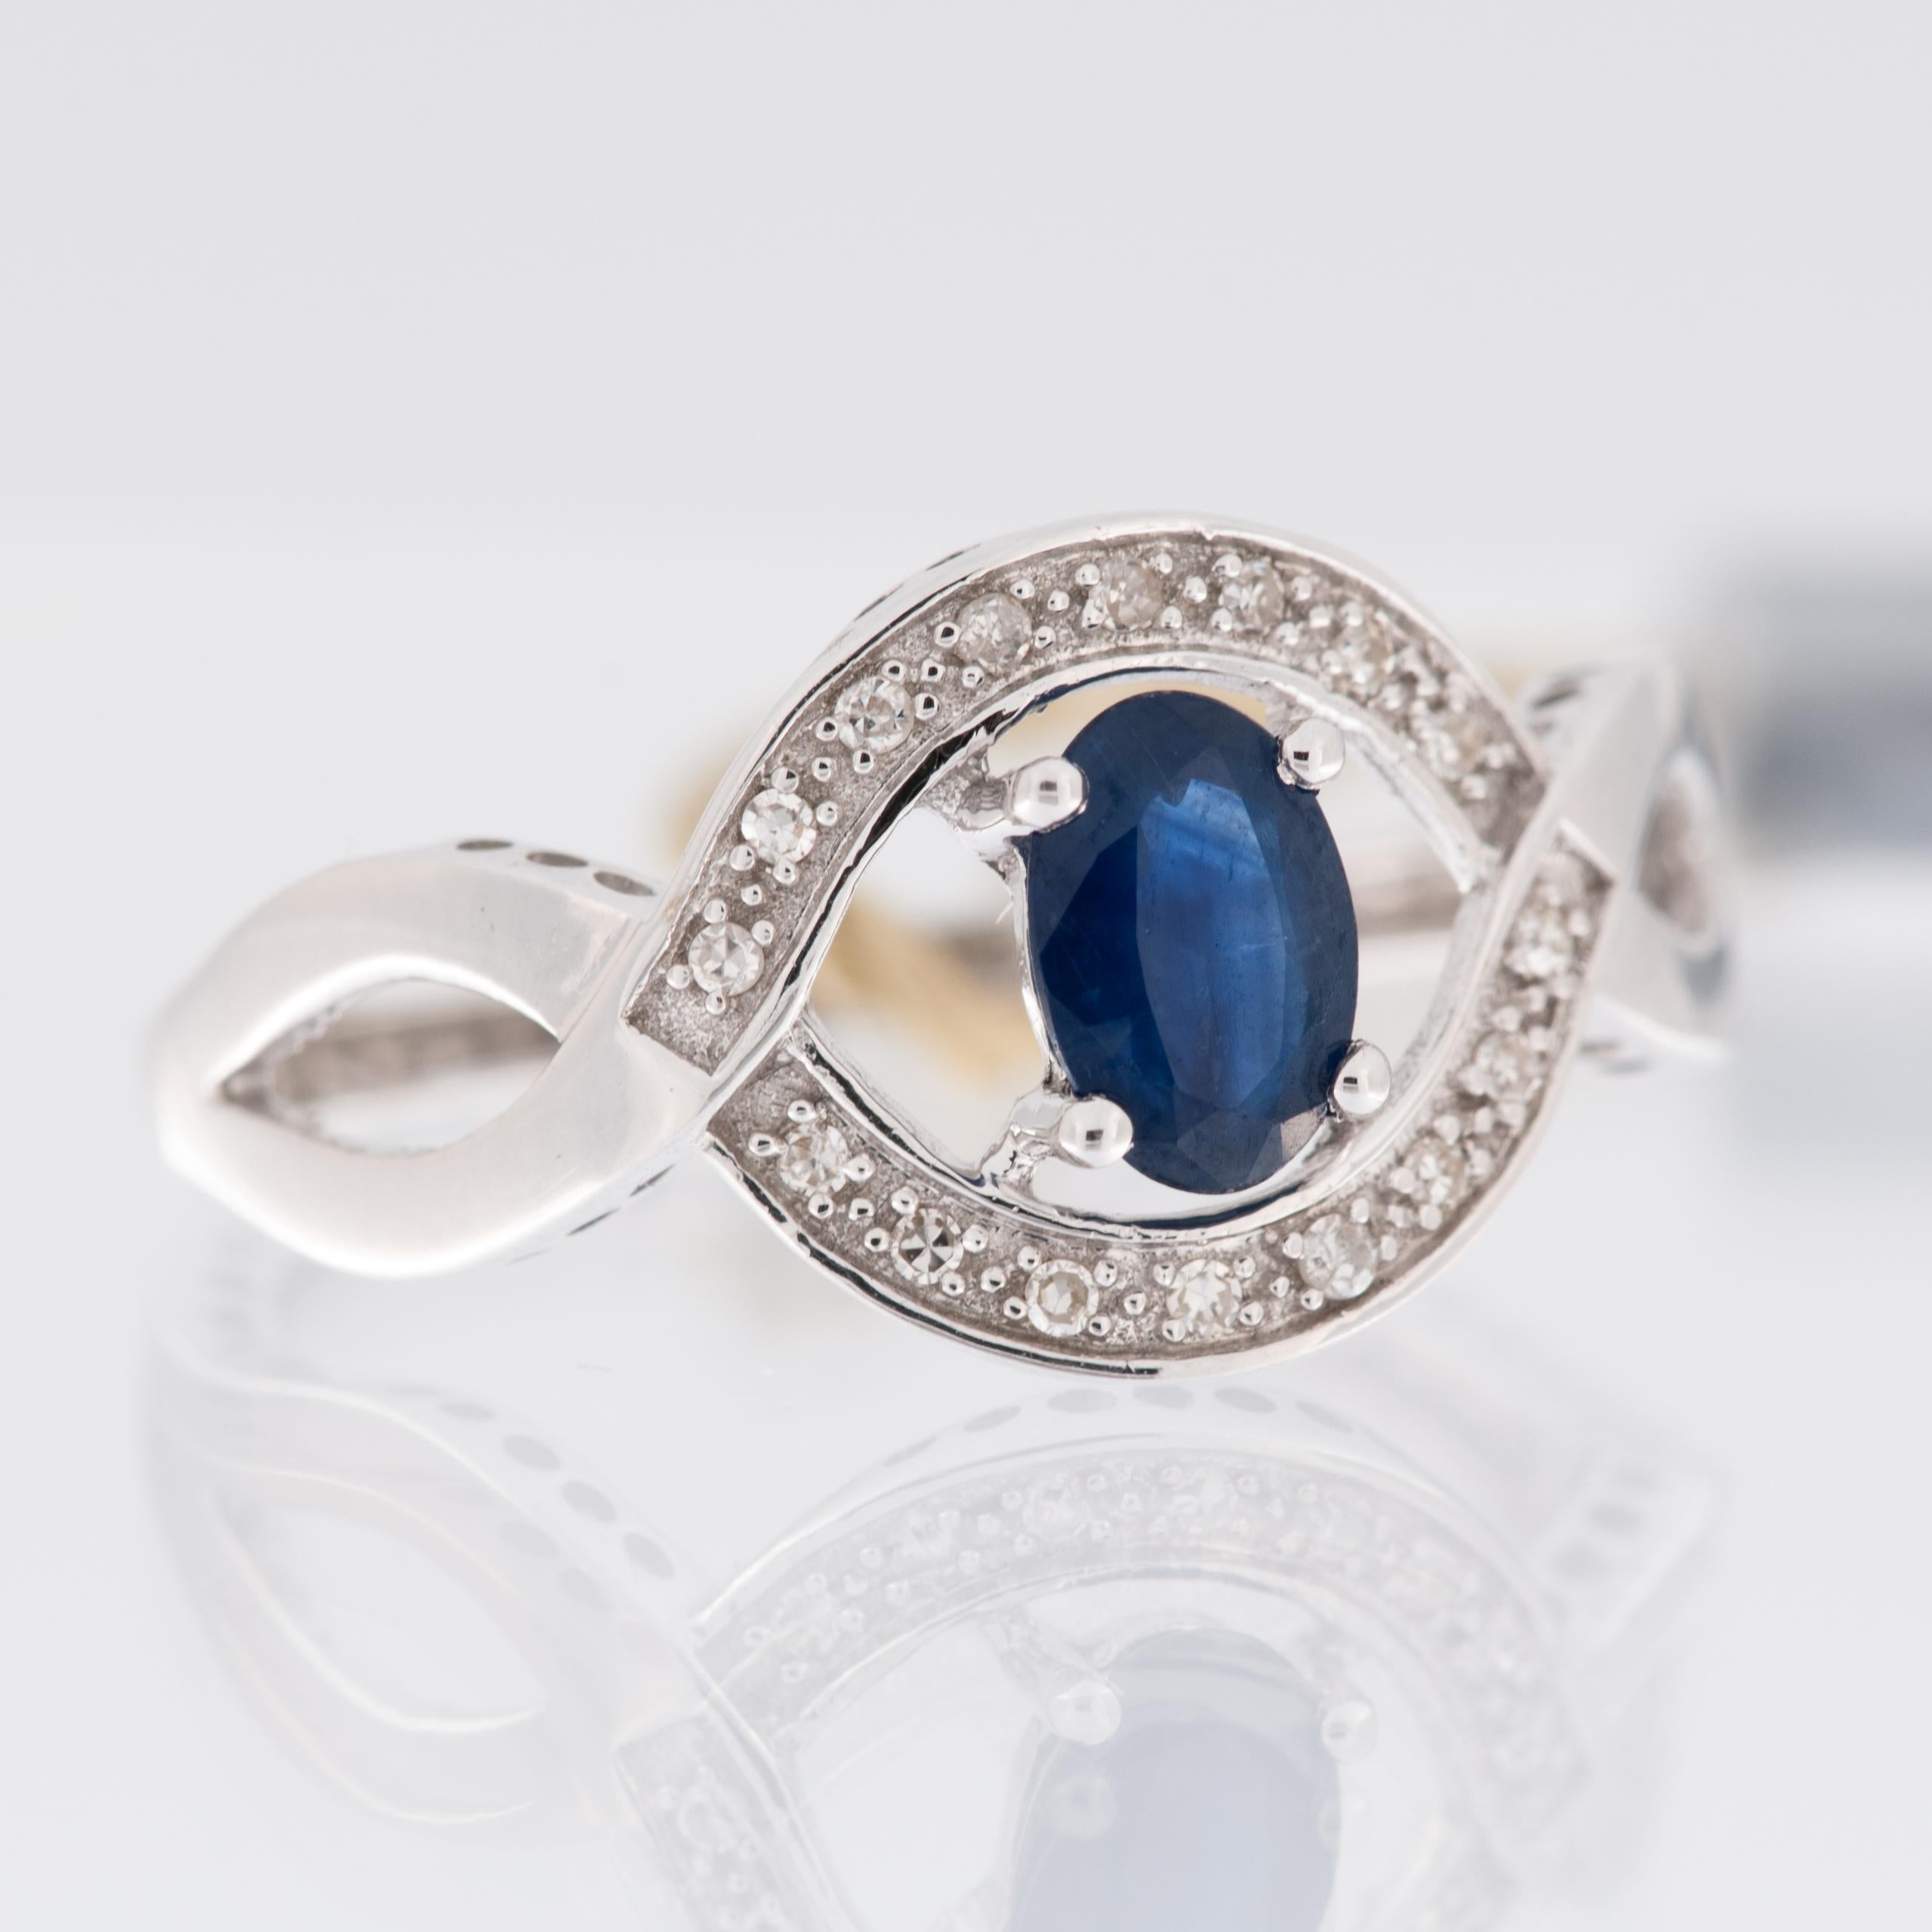 Vintage 9kt White Gold Ring with Diamonds and Sapphire In Good Condition For Sale In Esch-Sur-Alzette, LU